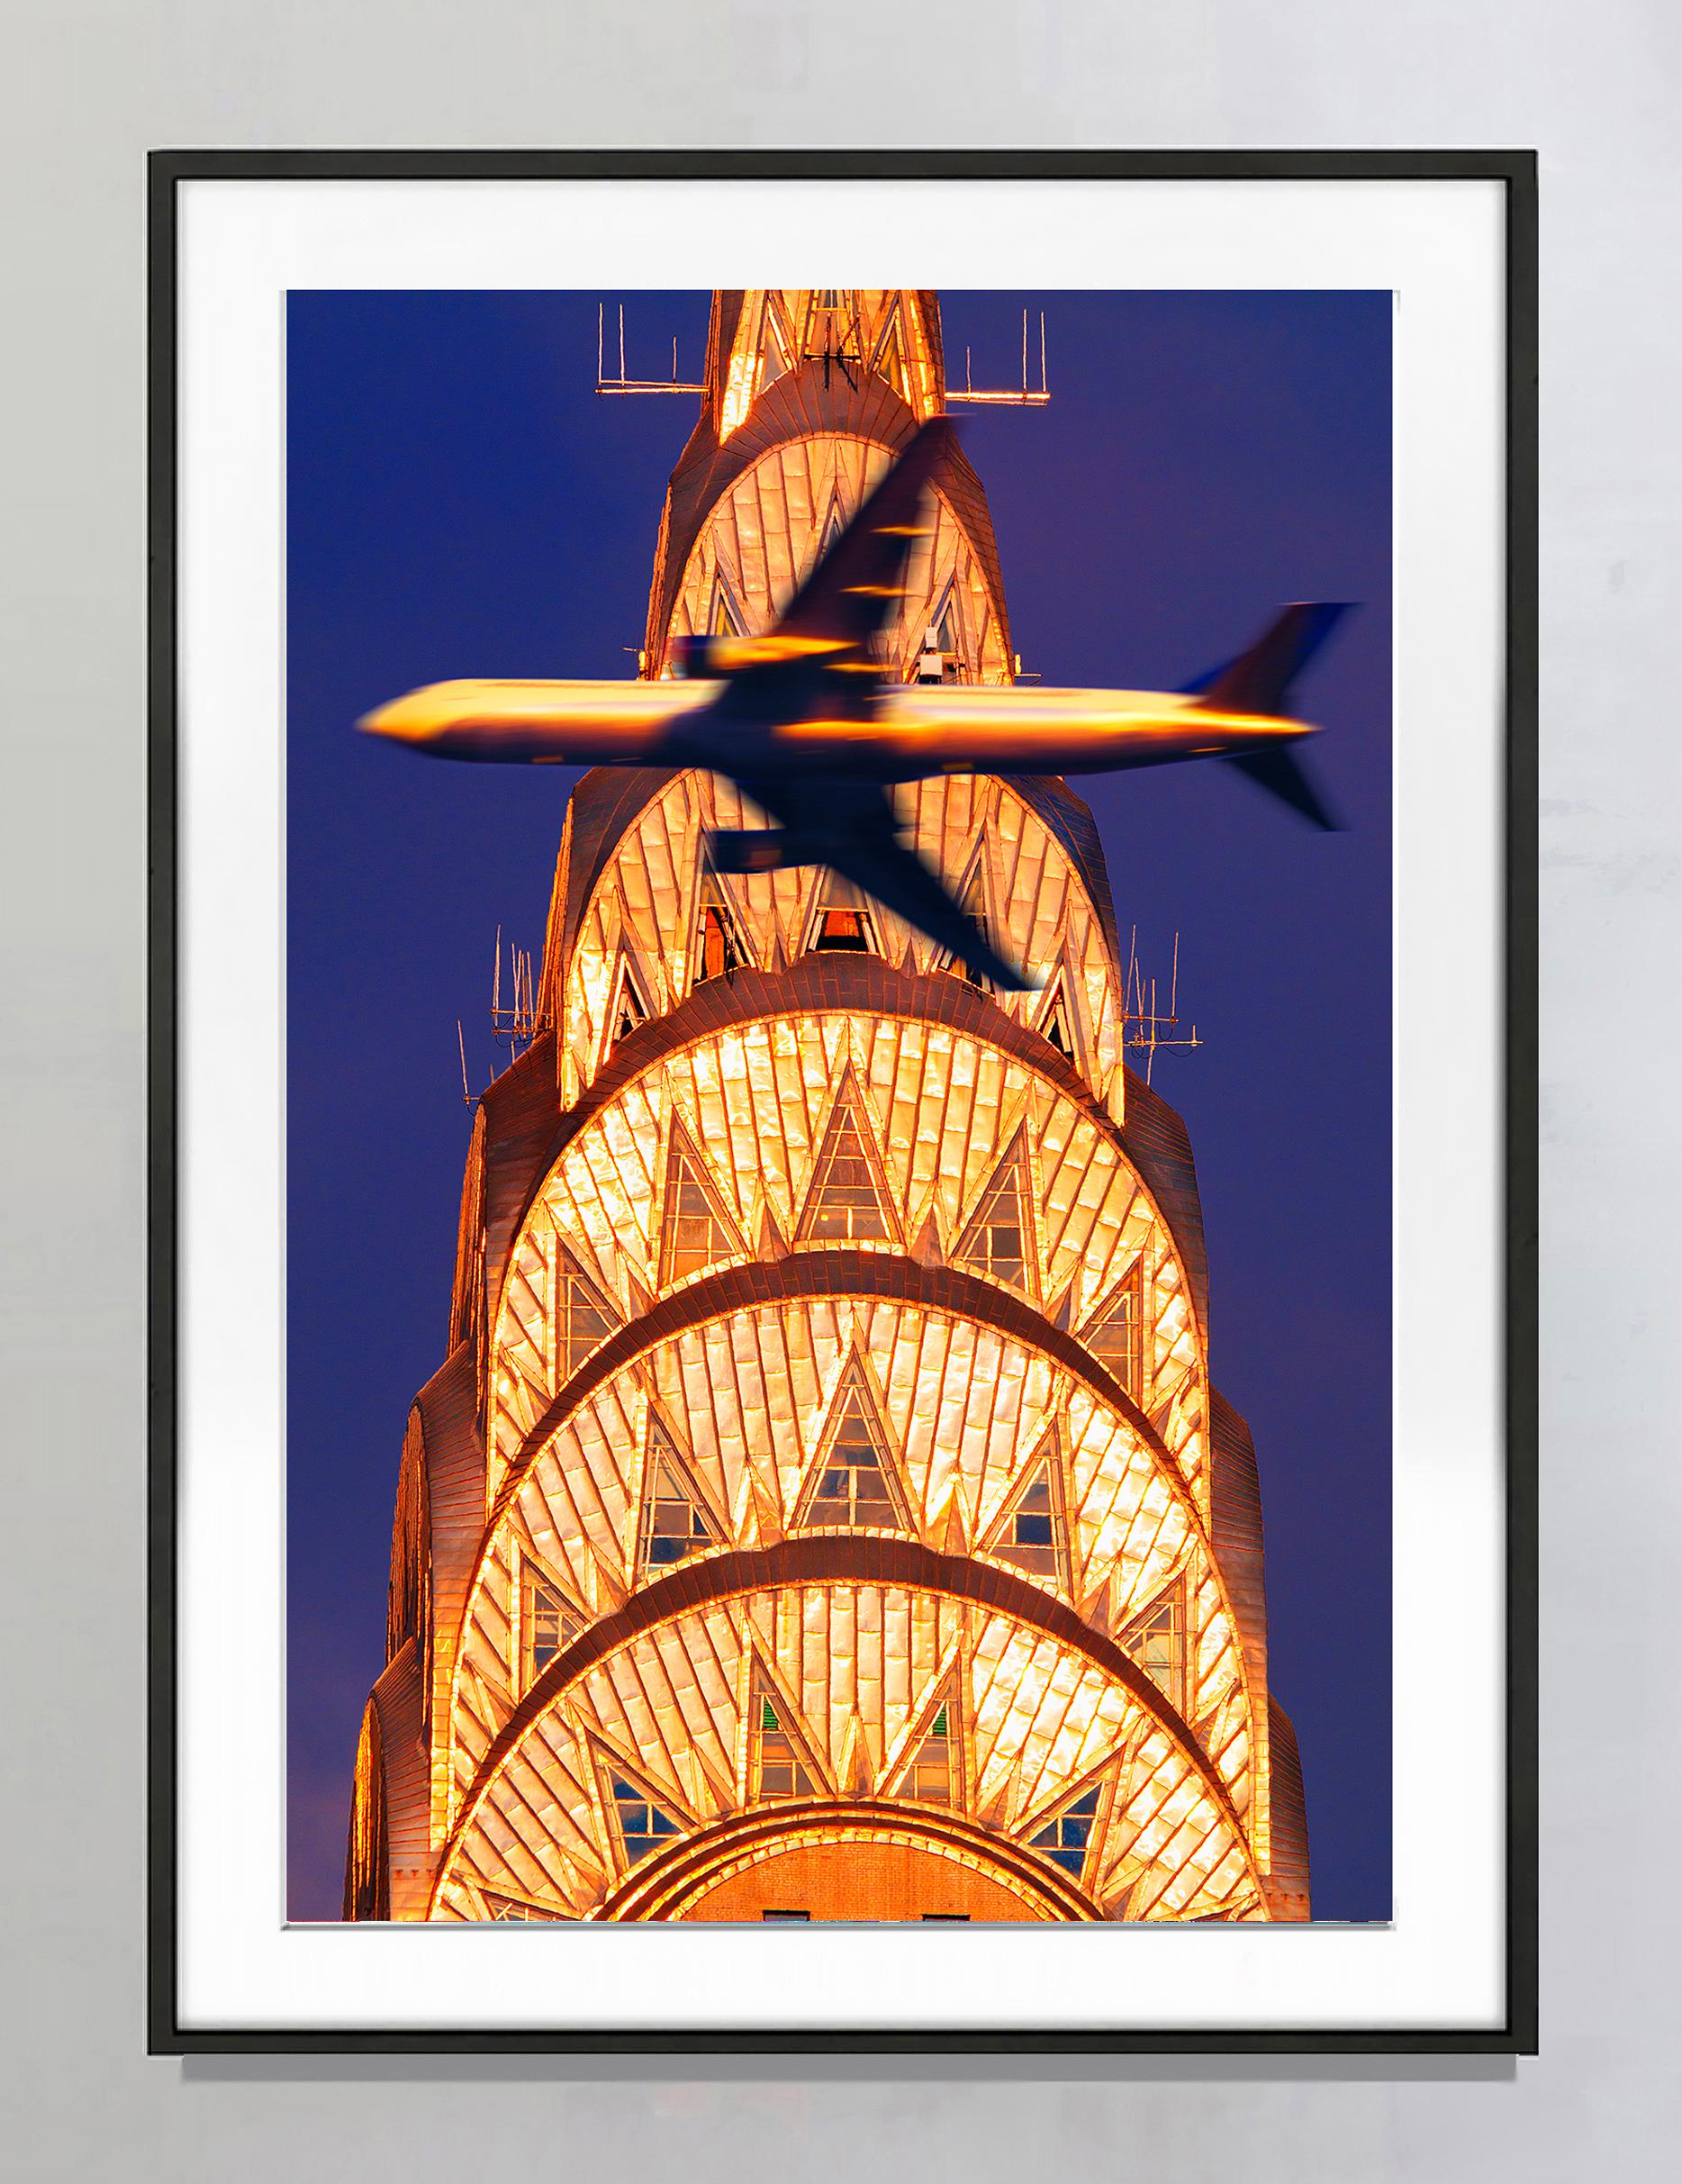 Chrysler Building Spire in Golden Light Intersected with Airplane,  Art Deco - Photograph by Mitchell Funk